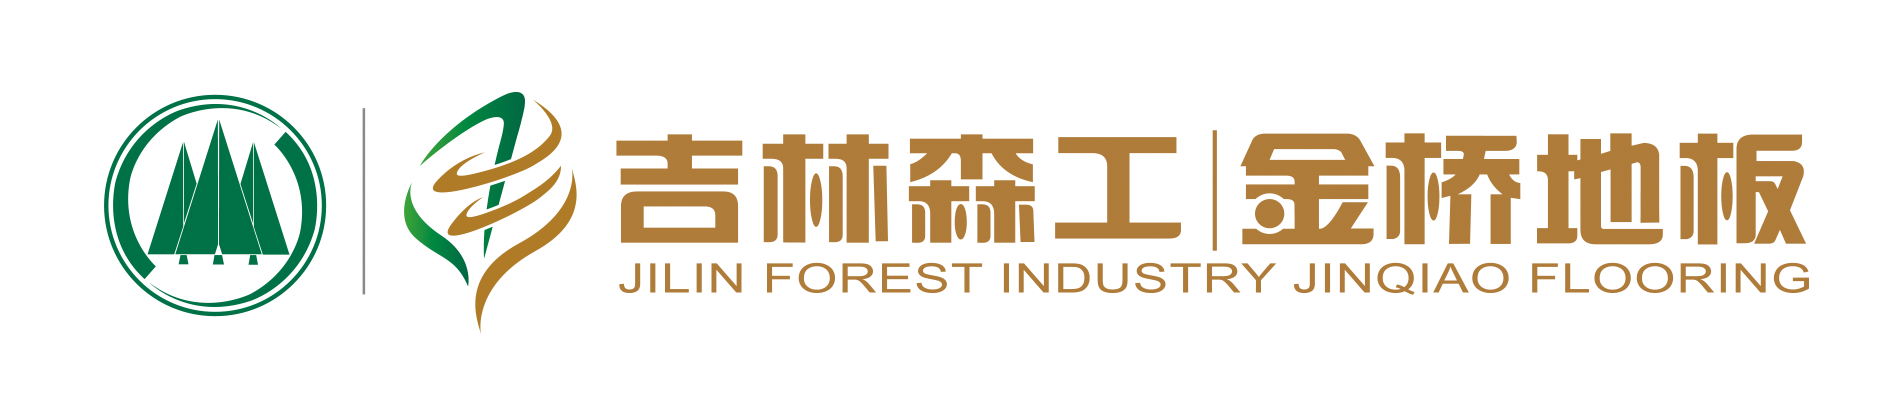 JILIN FOREST INDUSTRY JINQIAO FLOORING GROUP CO.,LTD.